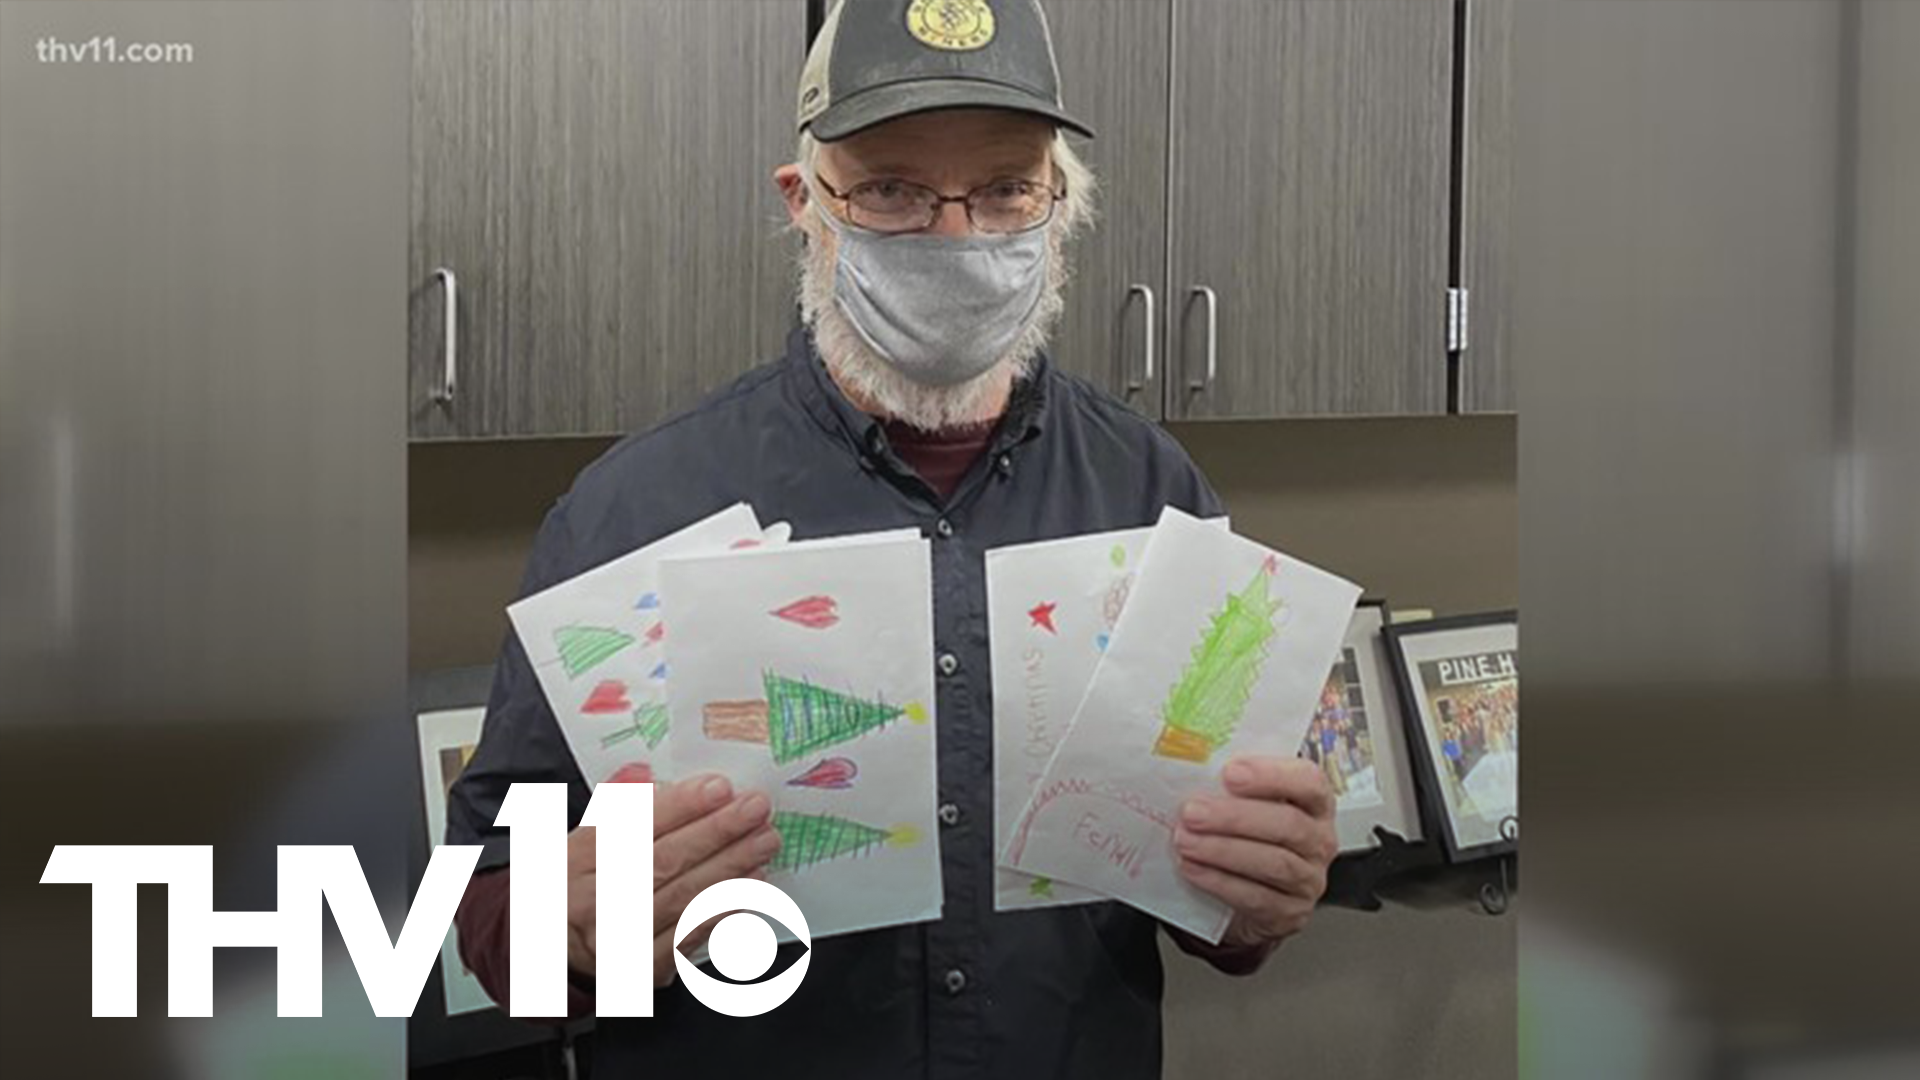 At Pine Haven Elementary in Bauxite, students are showing janitor Ferrell Bauer their appreciation for him during the pandemic by giving him Christmas cards.